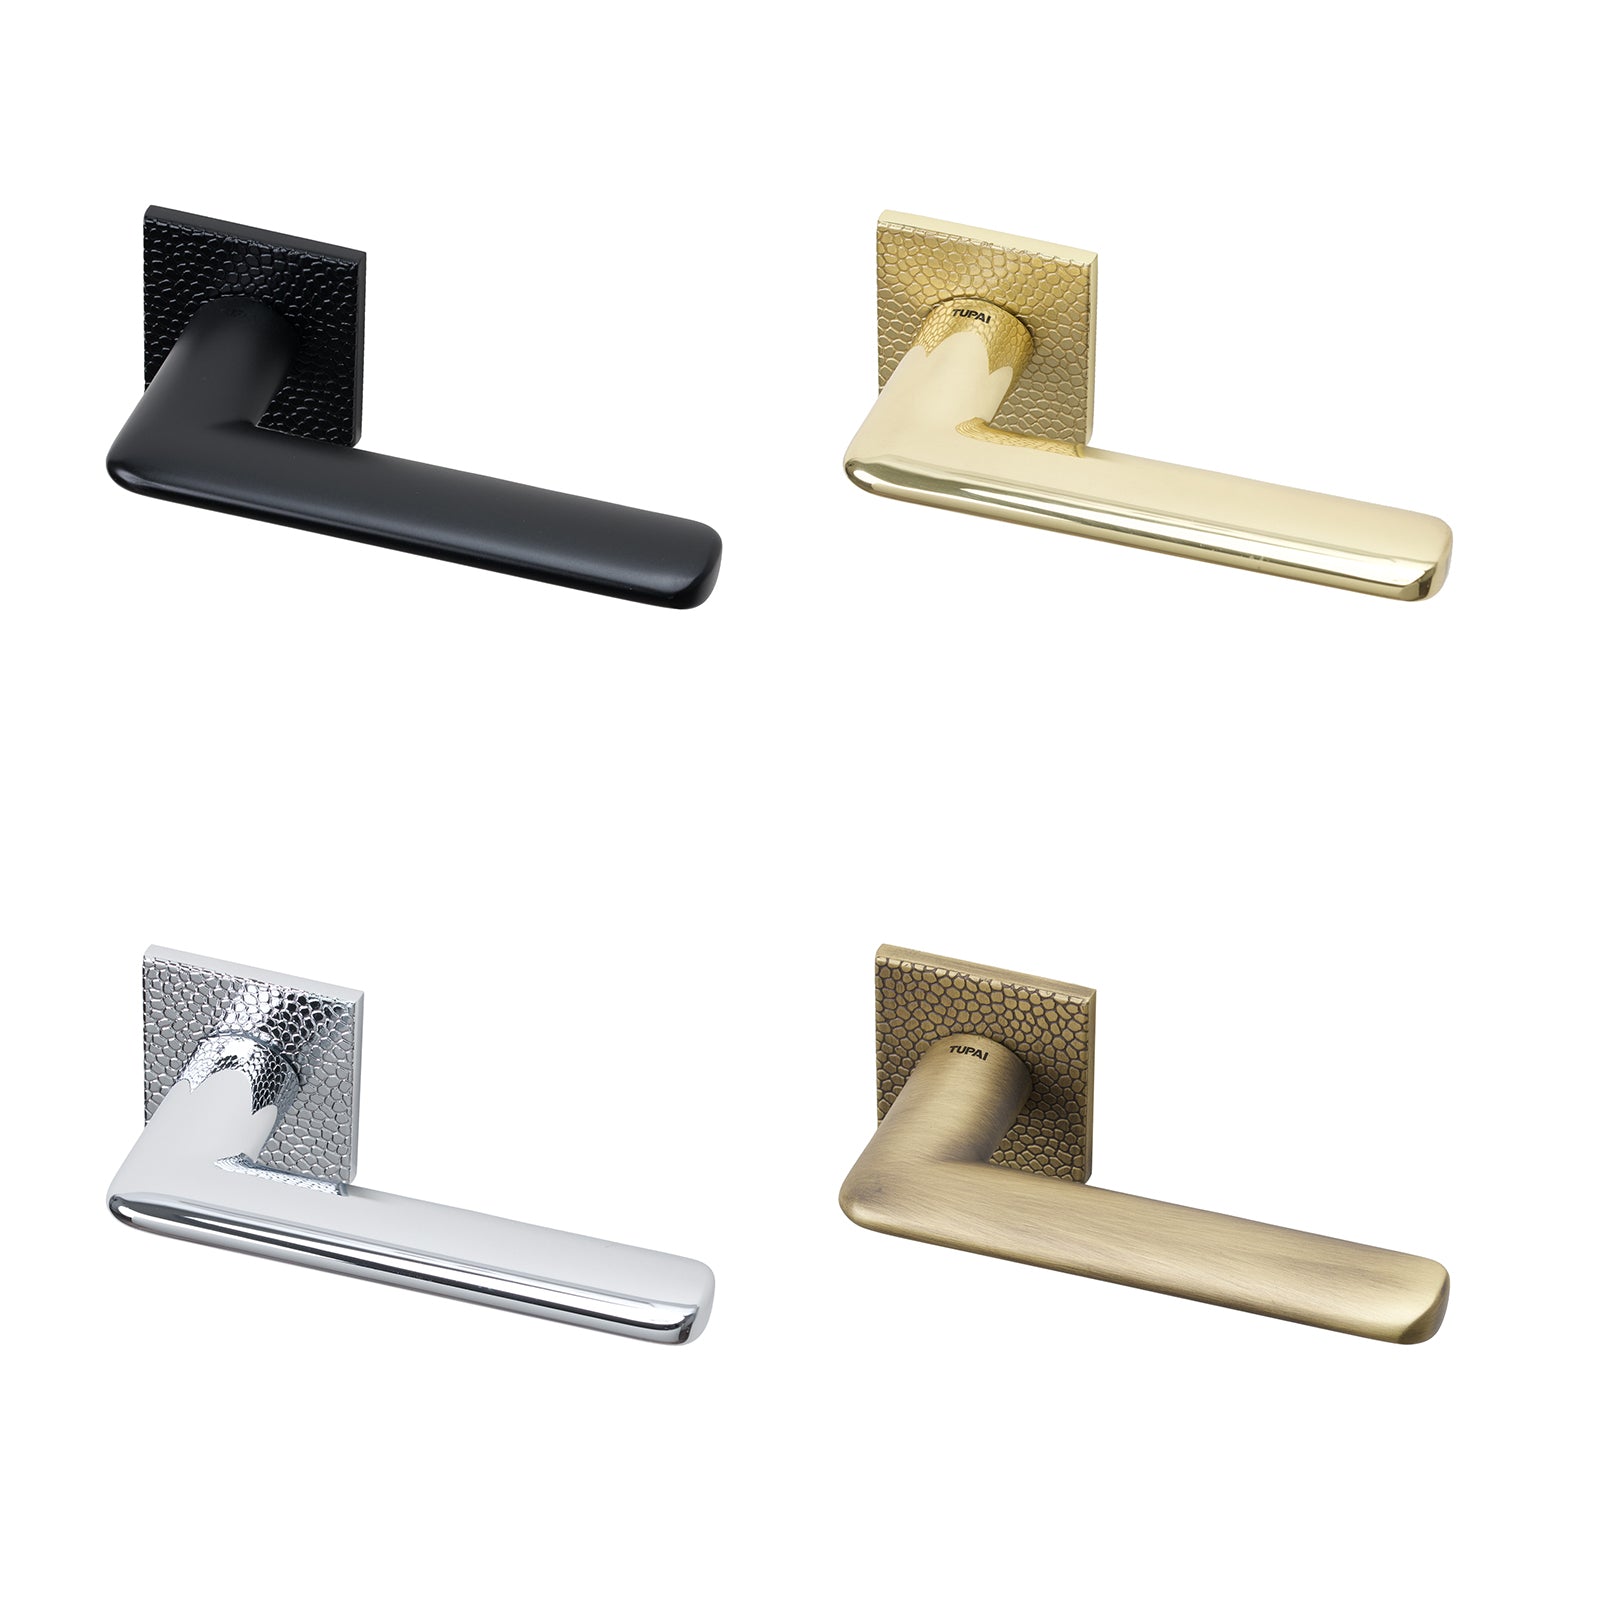 Tupai Edral lever on rose door handle with Pebbles texture design, in four finishes, Bright Chrome, Black Pearl, Matt Antique Brass, and Polished/Satin Brass.